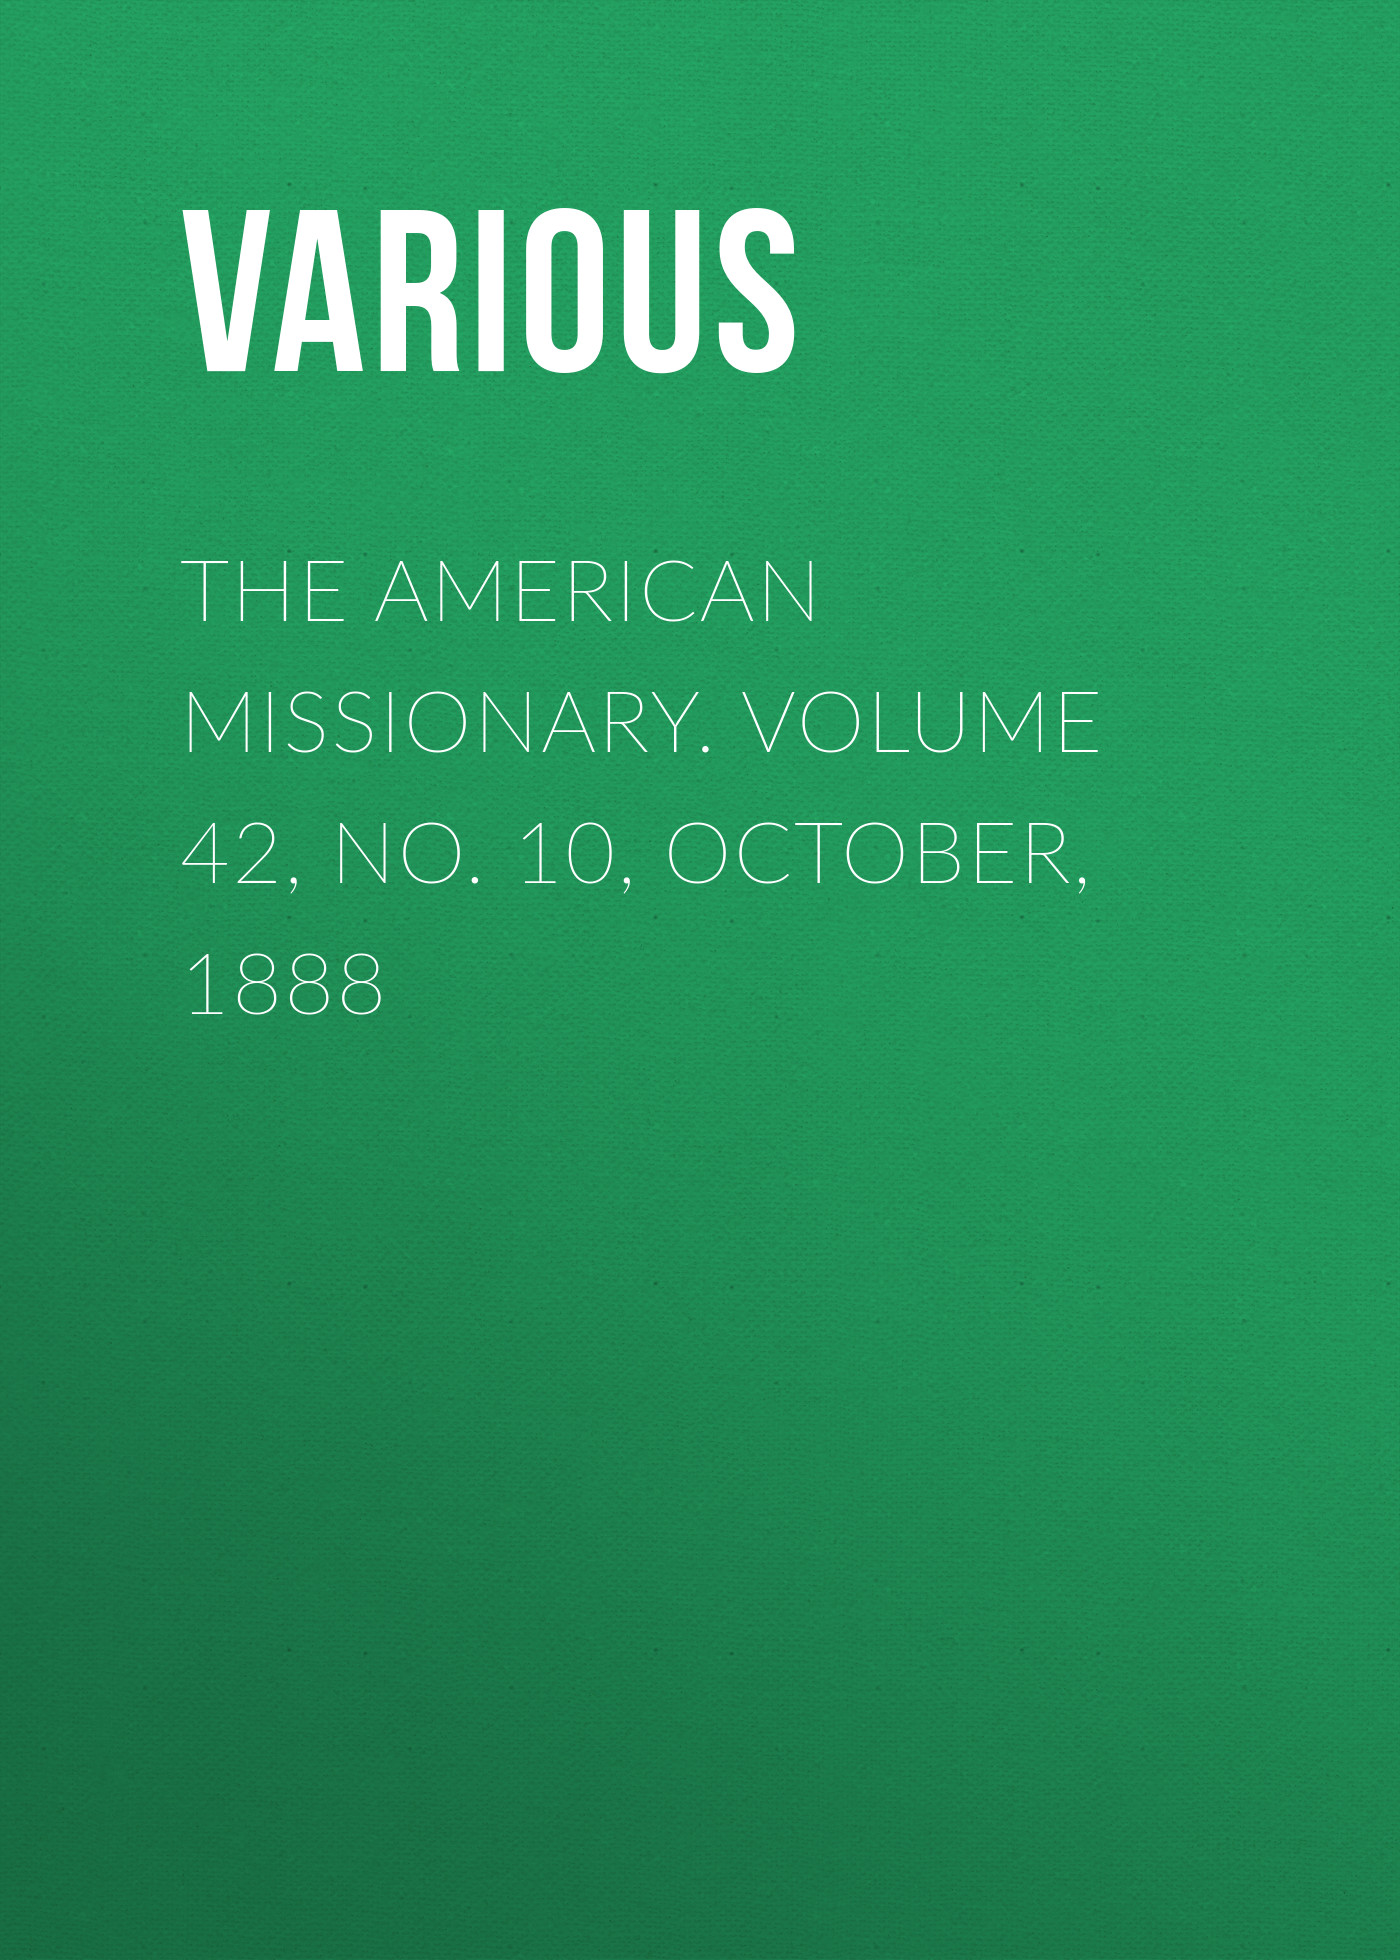 The American Missionary. Volume 42, No. 10, October, 1888